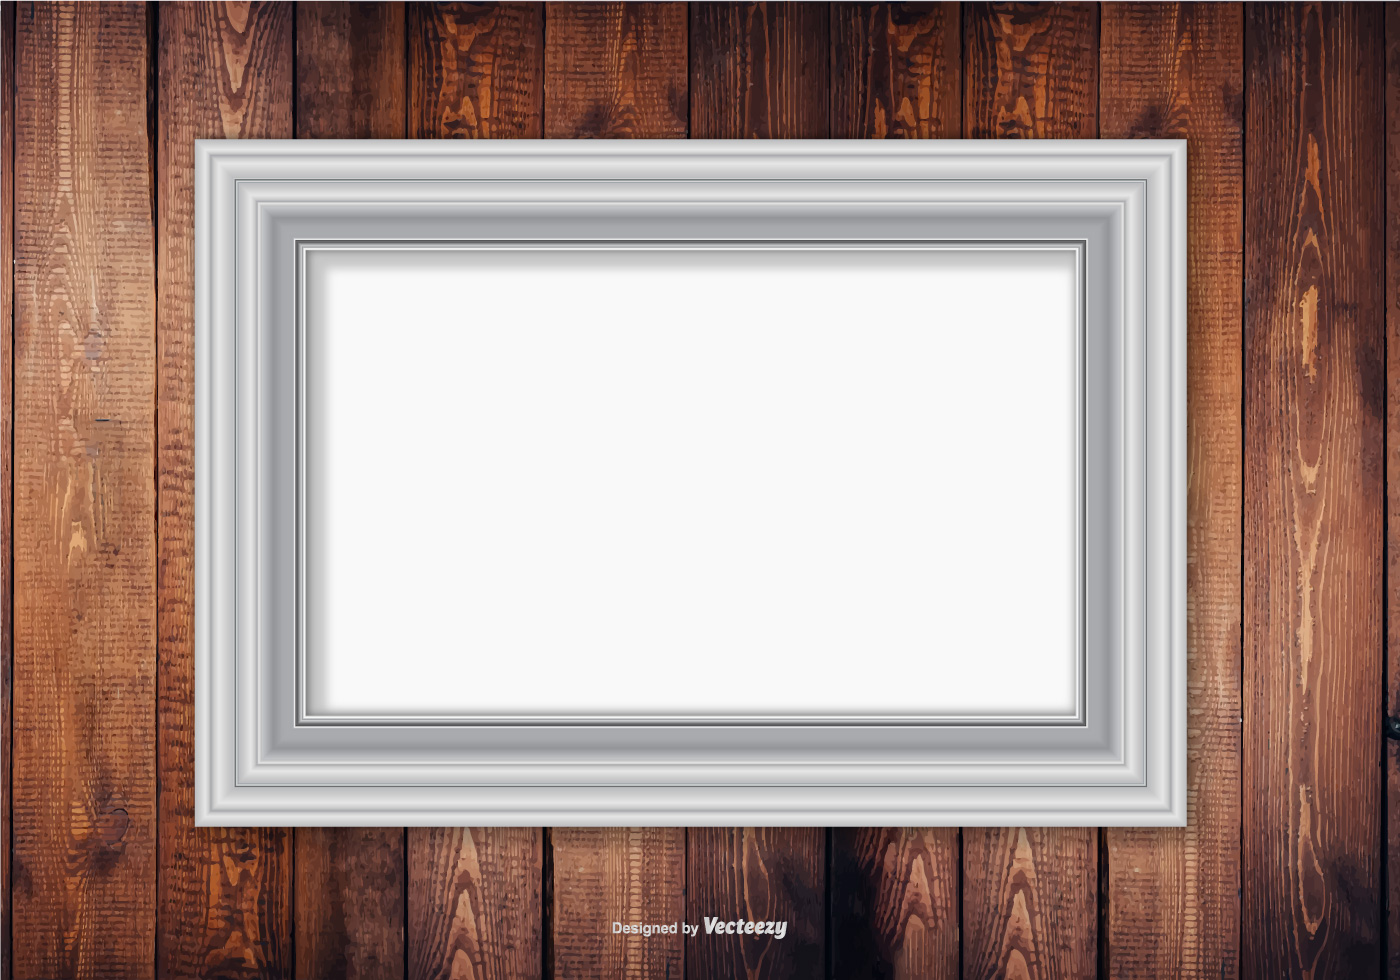 Silver Frame On Wood Wall Background - Download Free ...